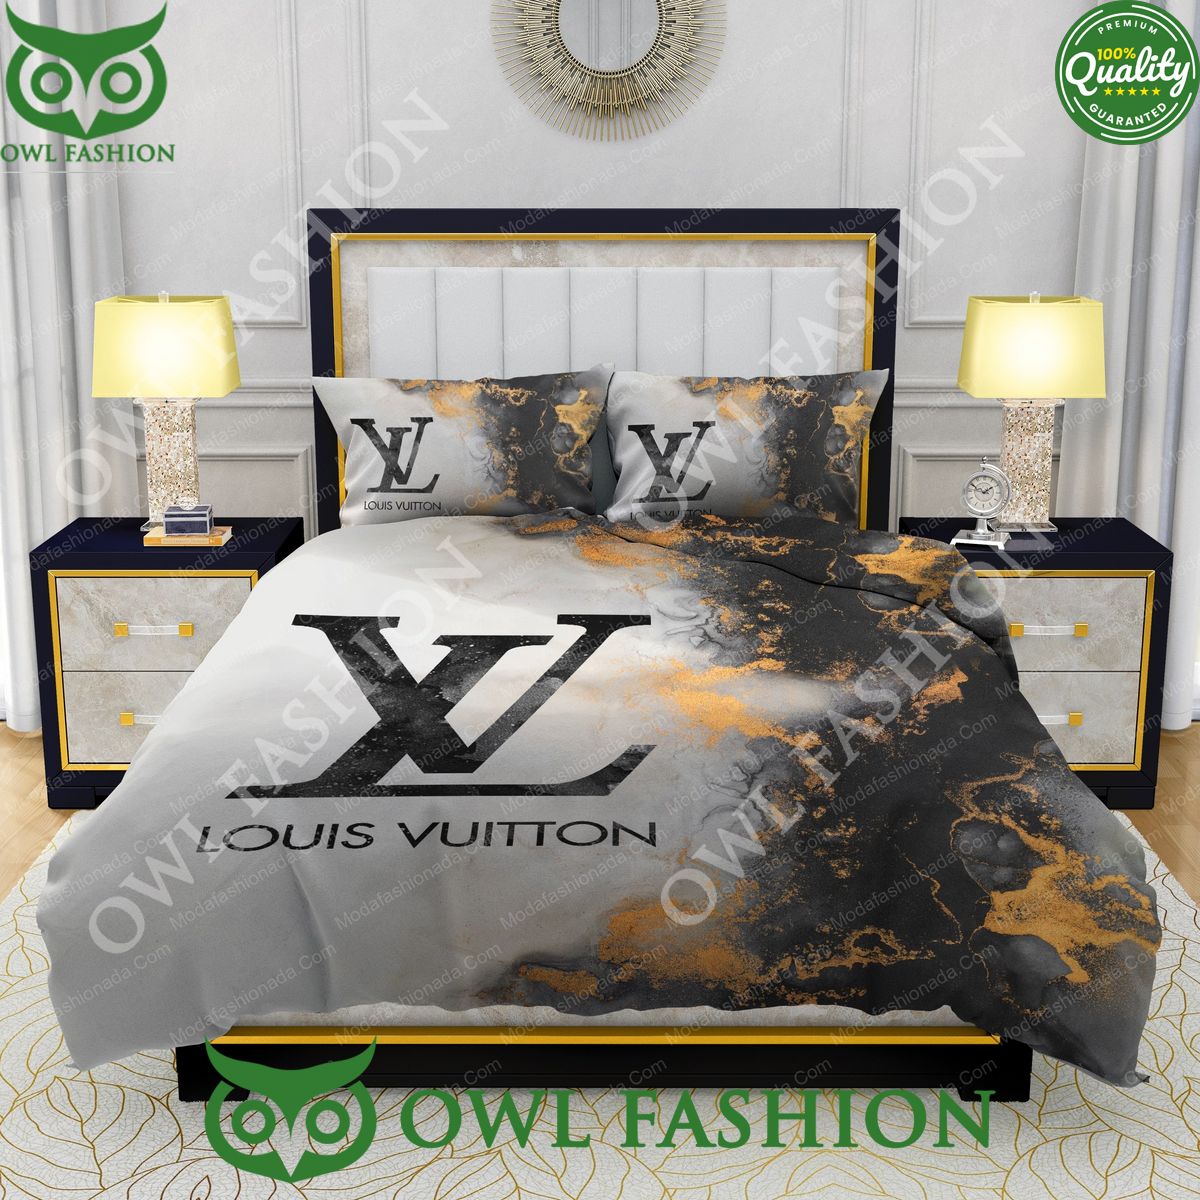 louis vuitton marble background bedding sets 1 hKofl.jpg